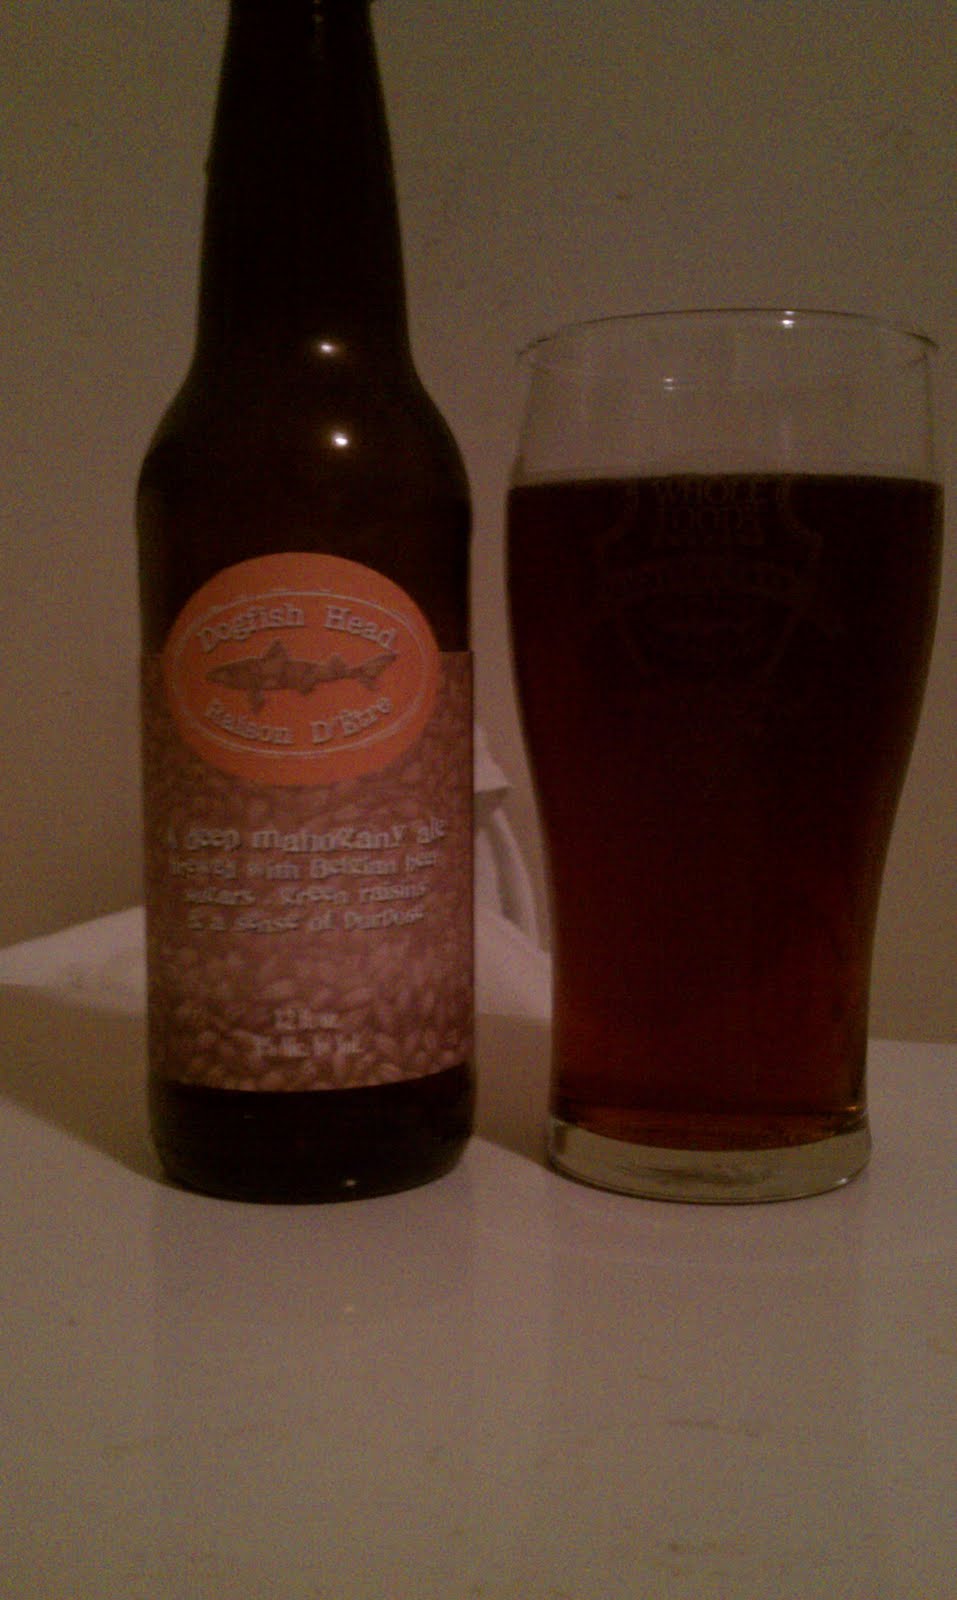 Dogfish+head+beer+advocate